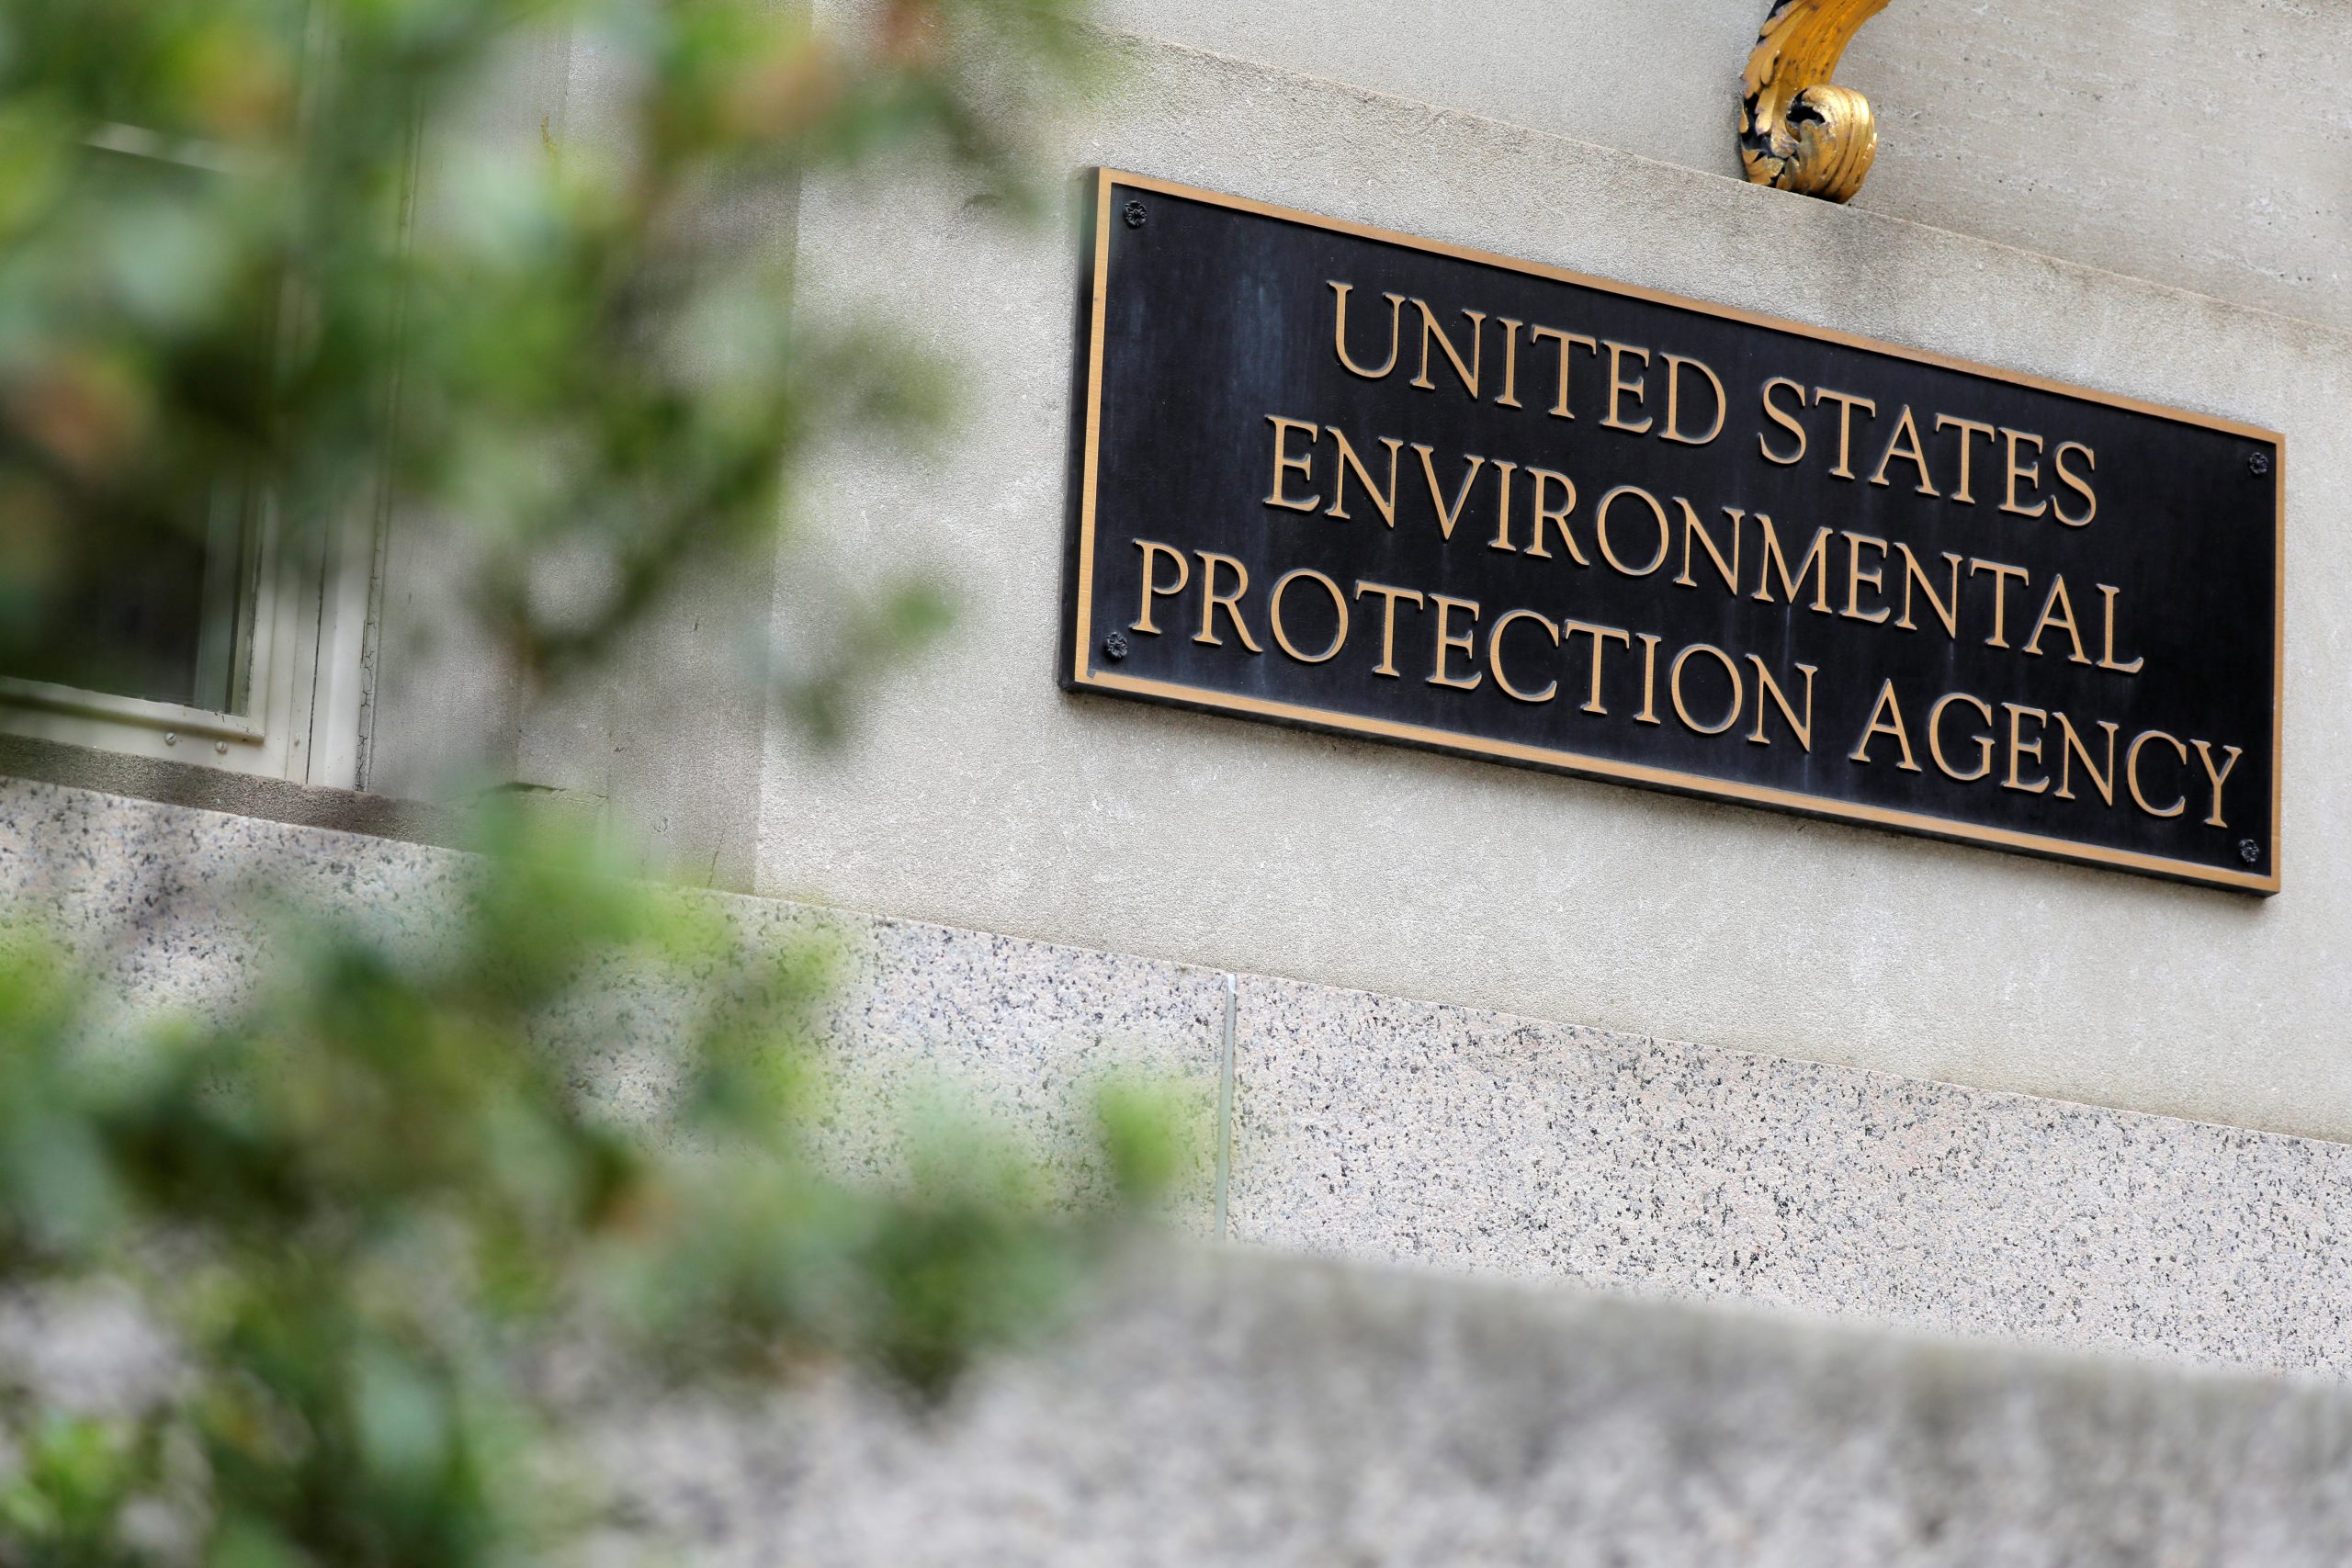 Signage is seen at the headquarters of the United States Environmental Protection Agency (EPA) in Washington, D.C., U.S.